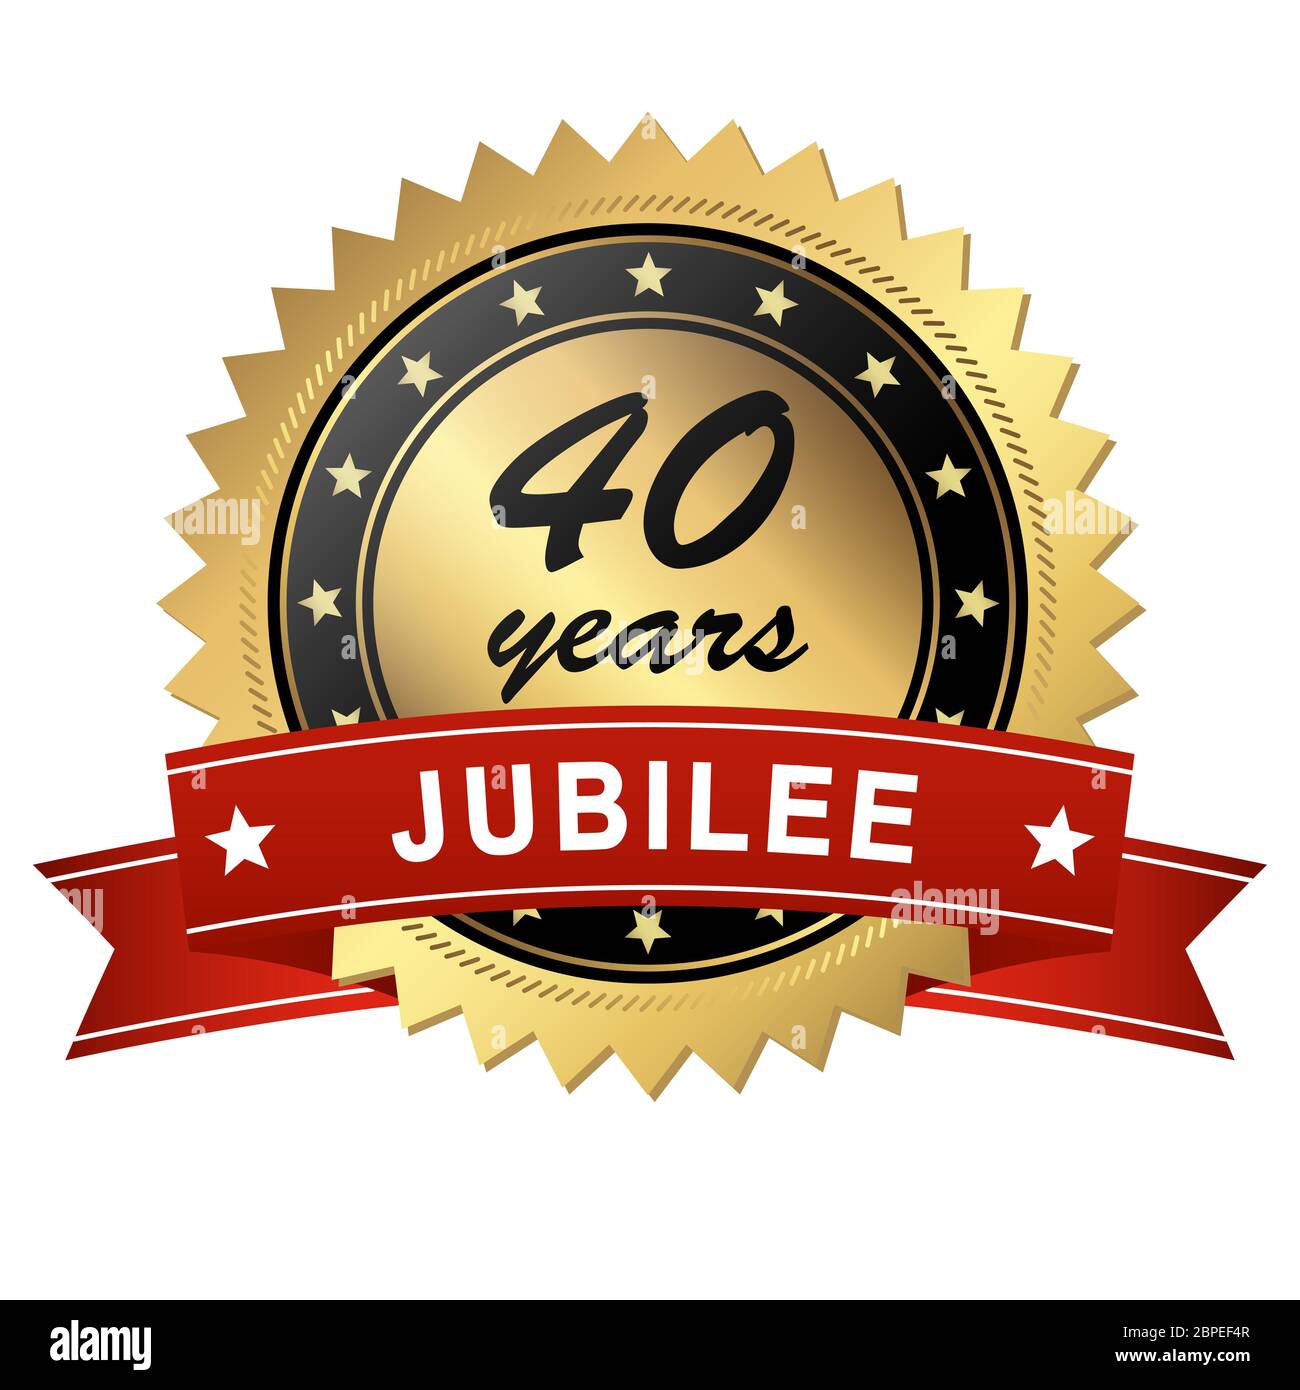 golden jubilee medallion with red banner for 40 years Stock Photo